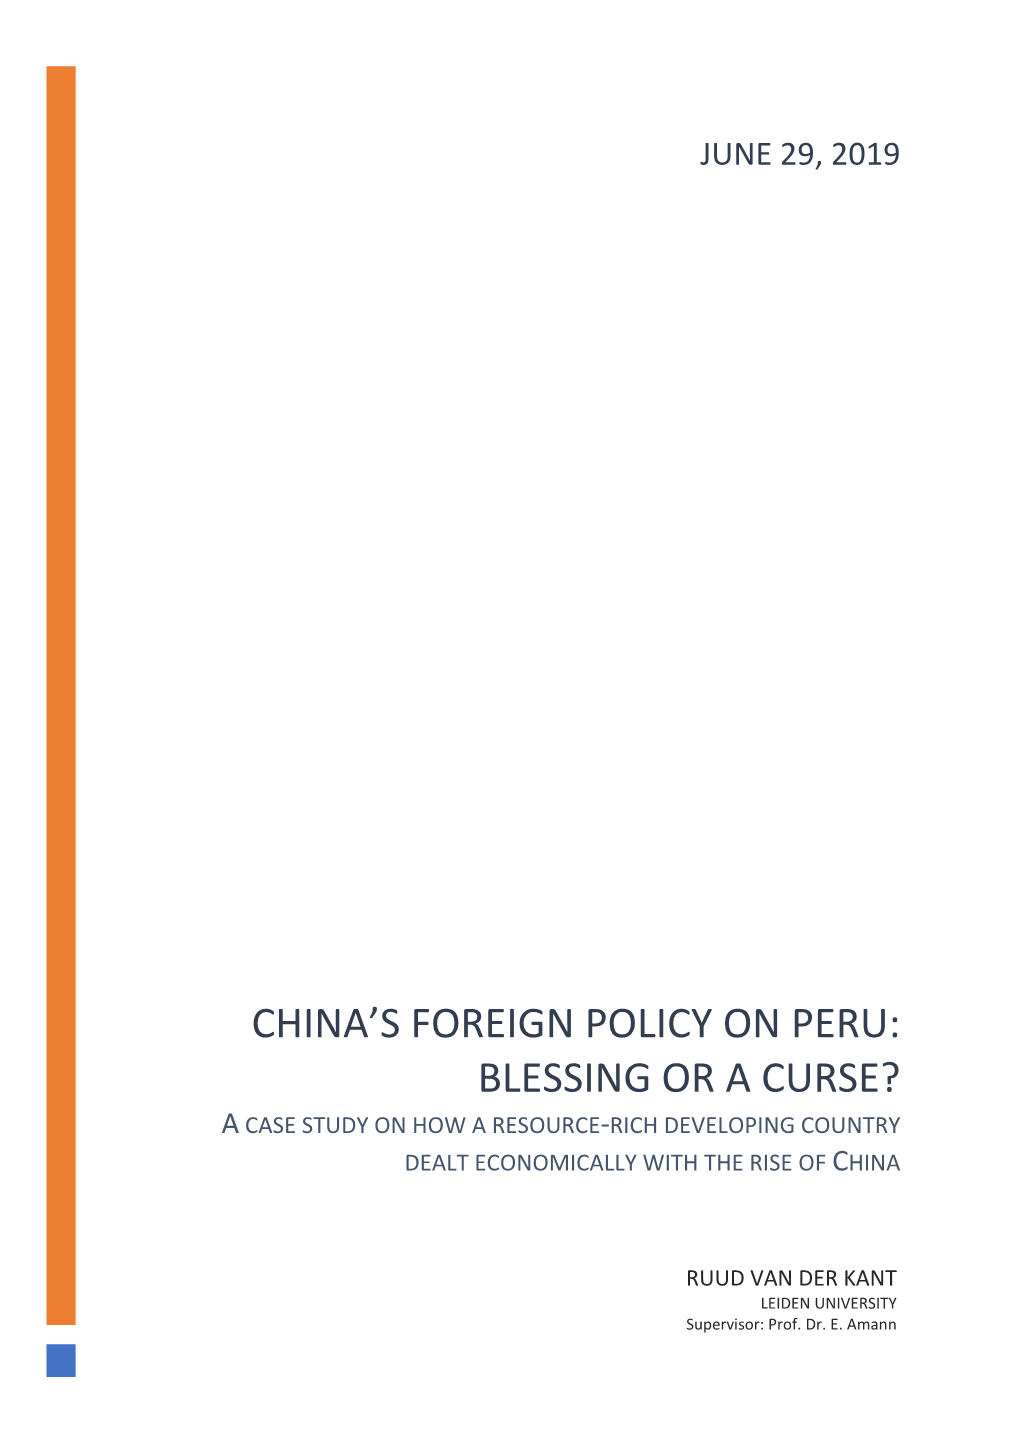 China's Foreign Policy on Peru